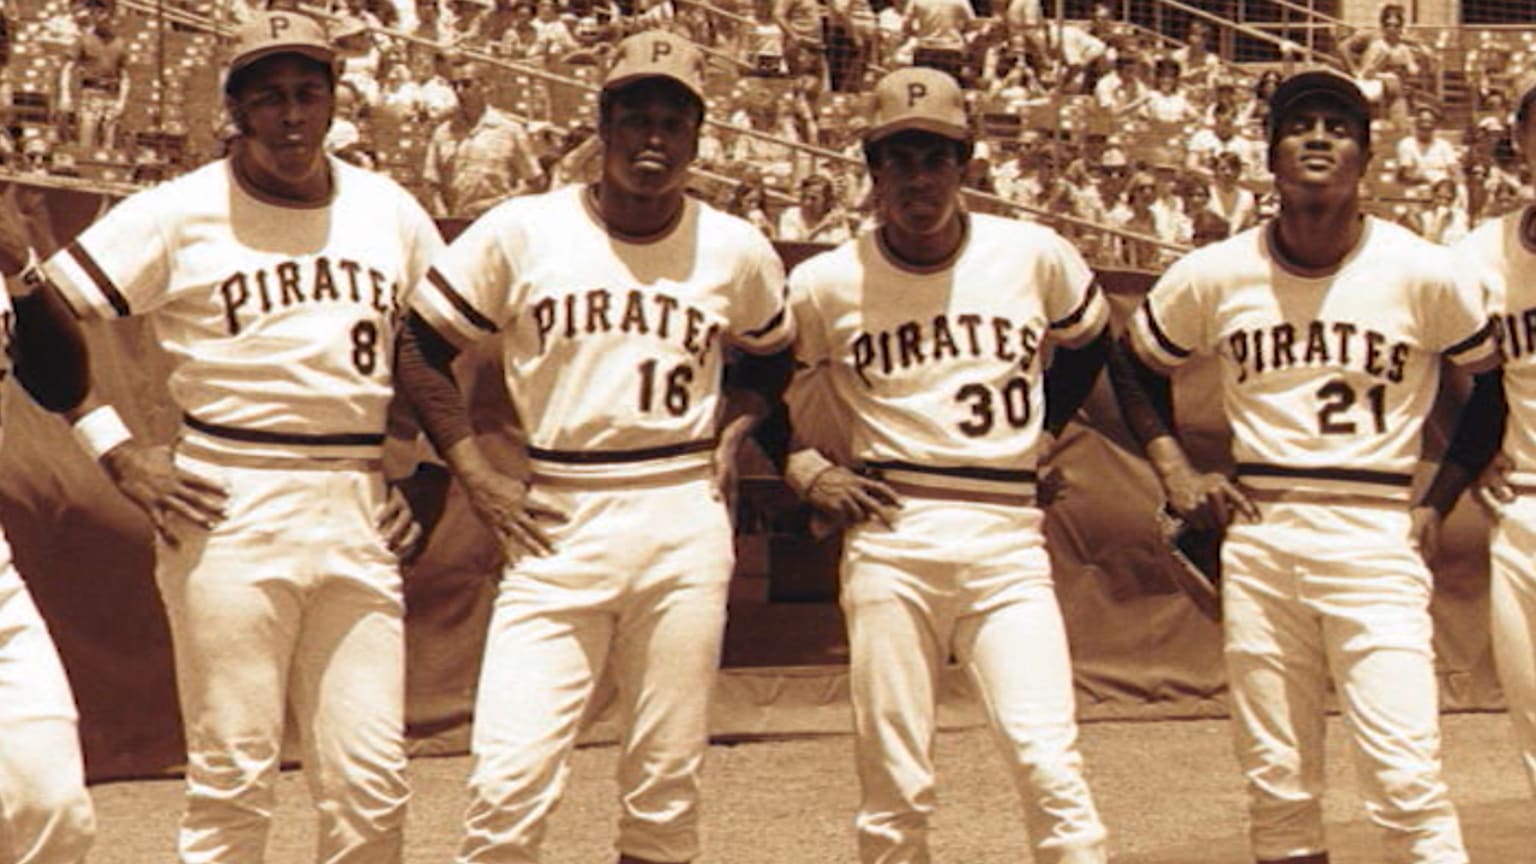 MLB Network Special: 1971 Pirates